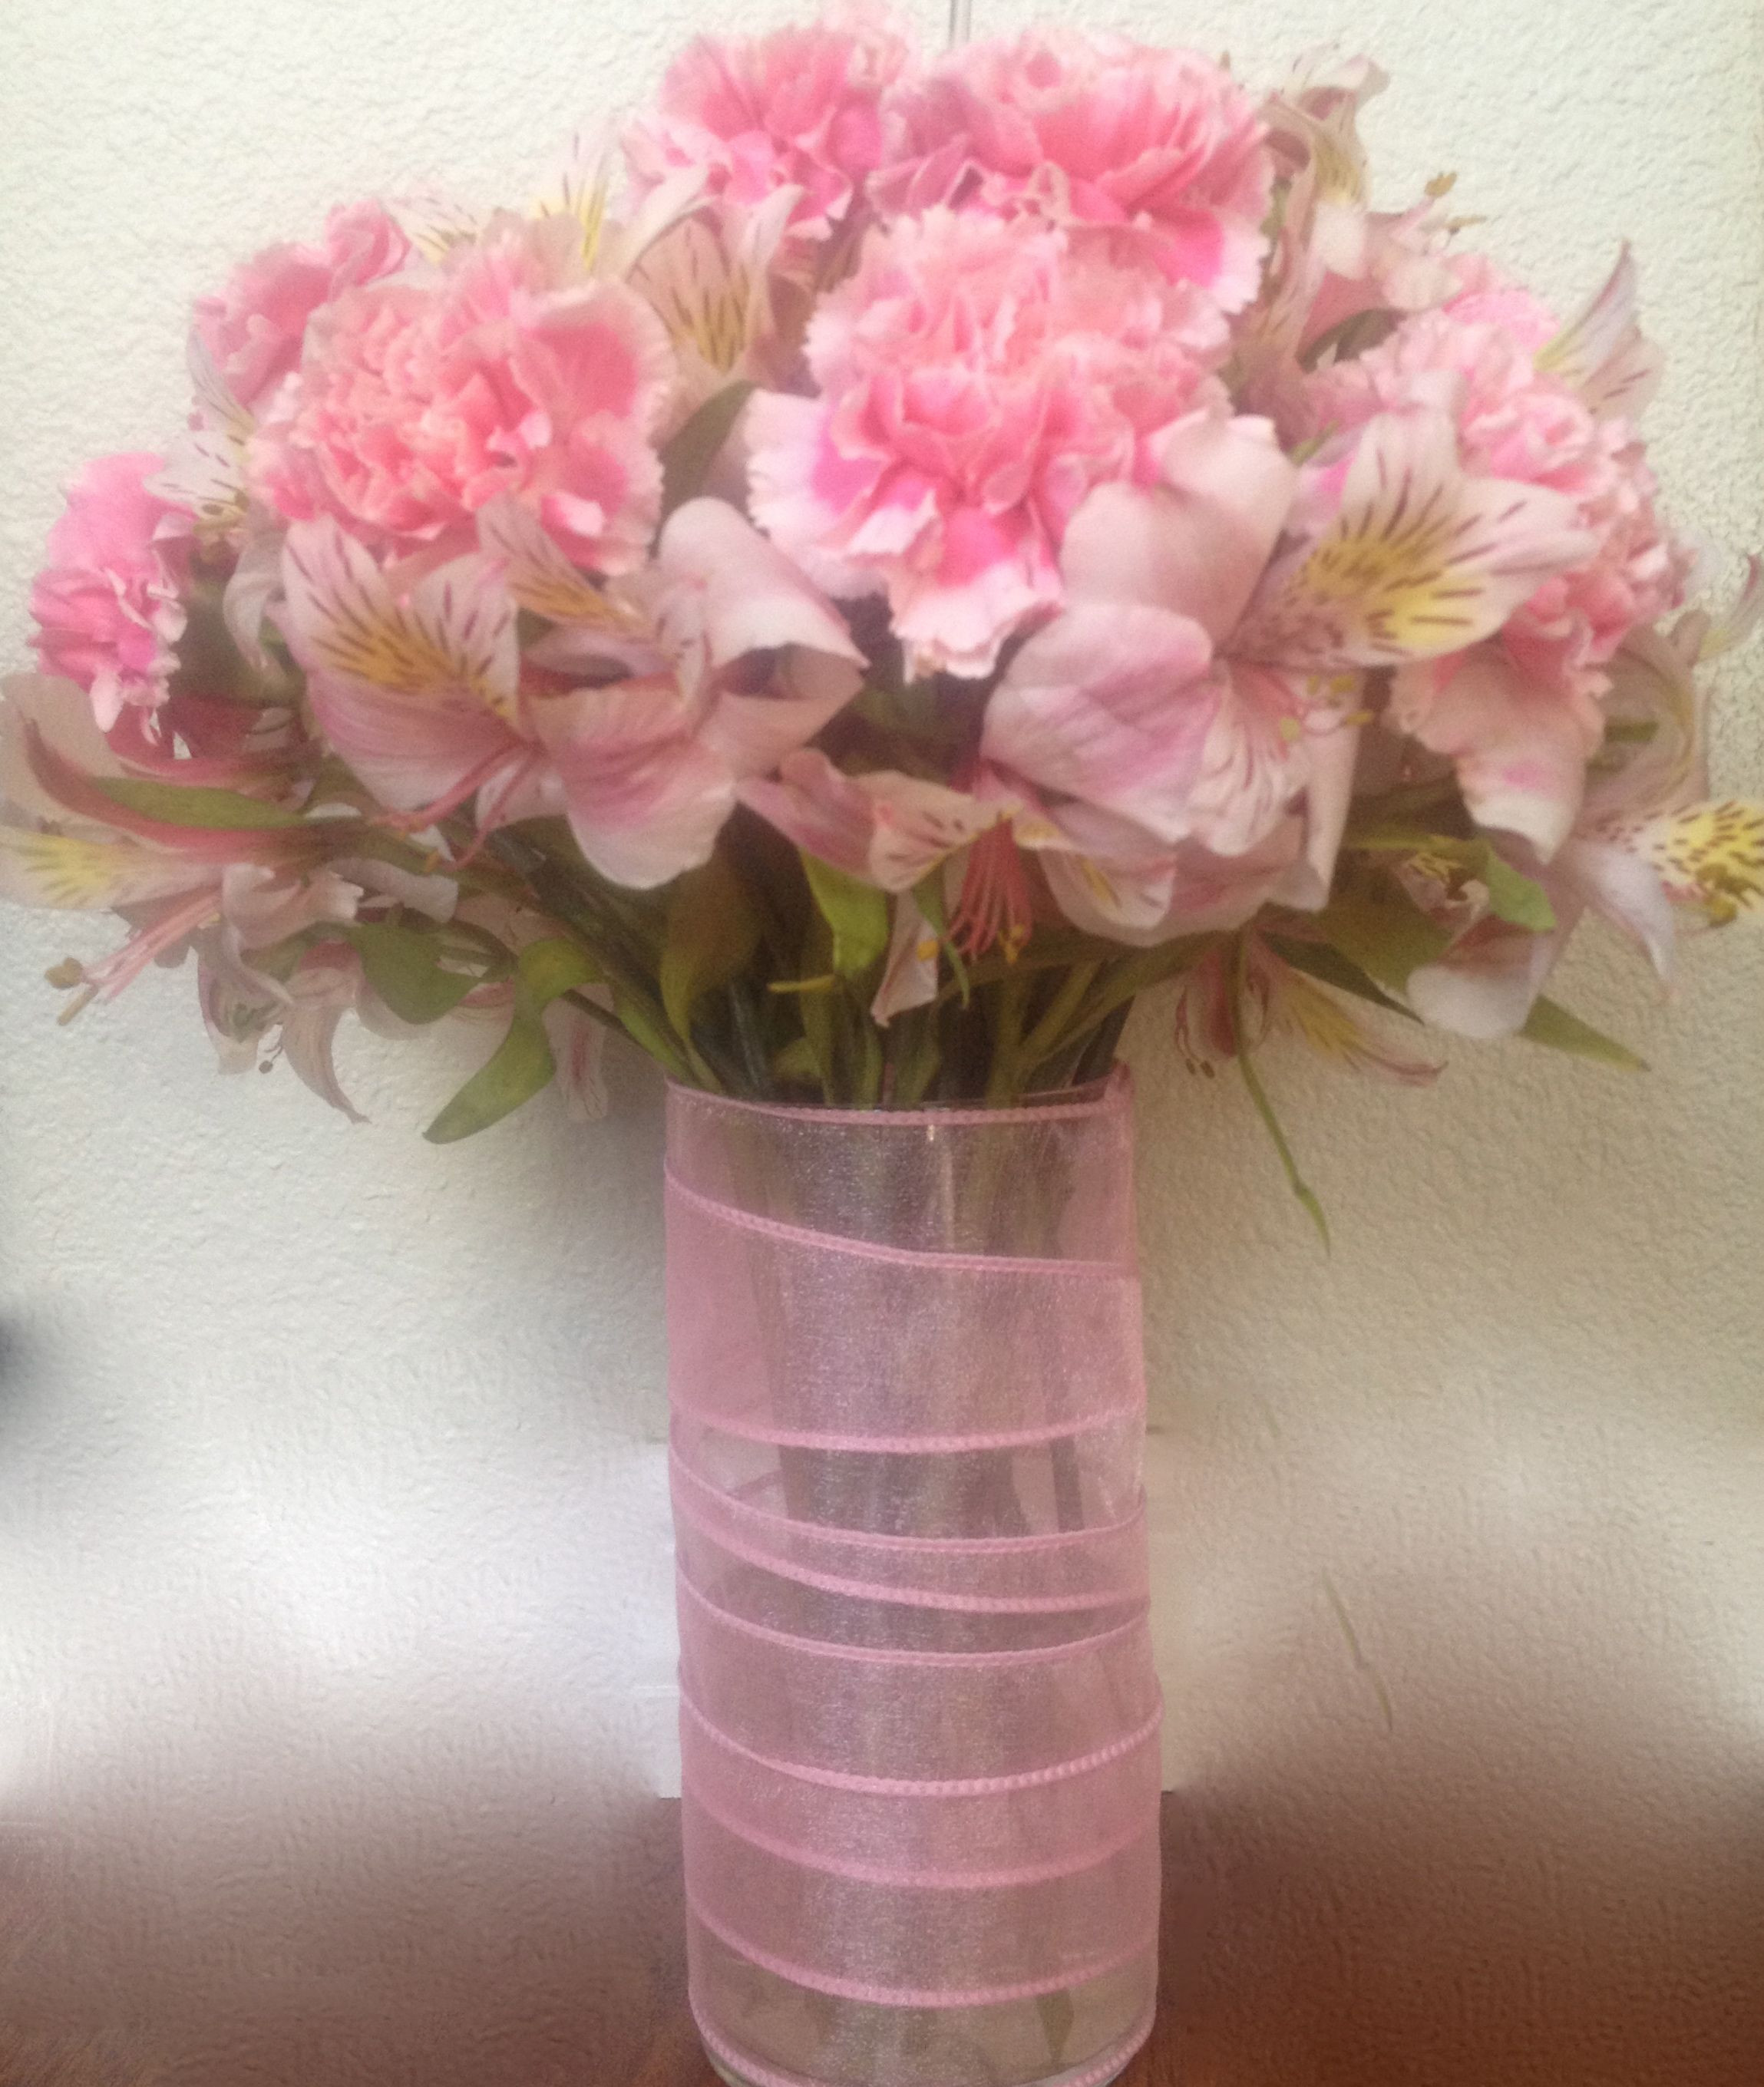 24 Popular Brown Glass Vases wholesale 2024 free download brown glass vases wholesale of its a girl pink carnations alstroemeria in a glass vase wrapped with regard to pink carnations alstroemeria in a glass vase wrapped in pink ribbon